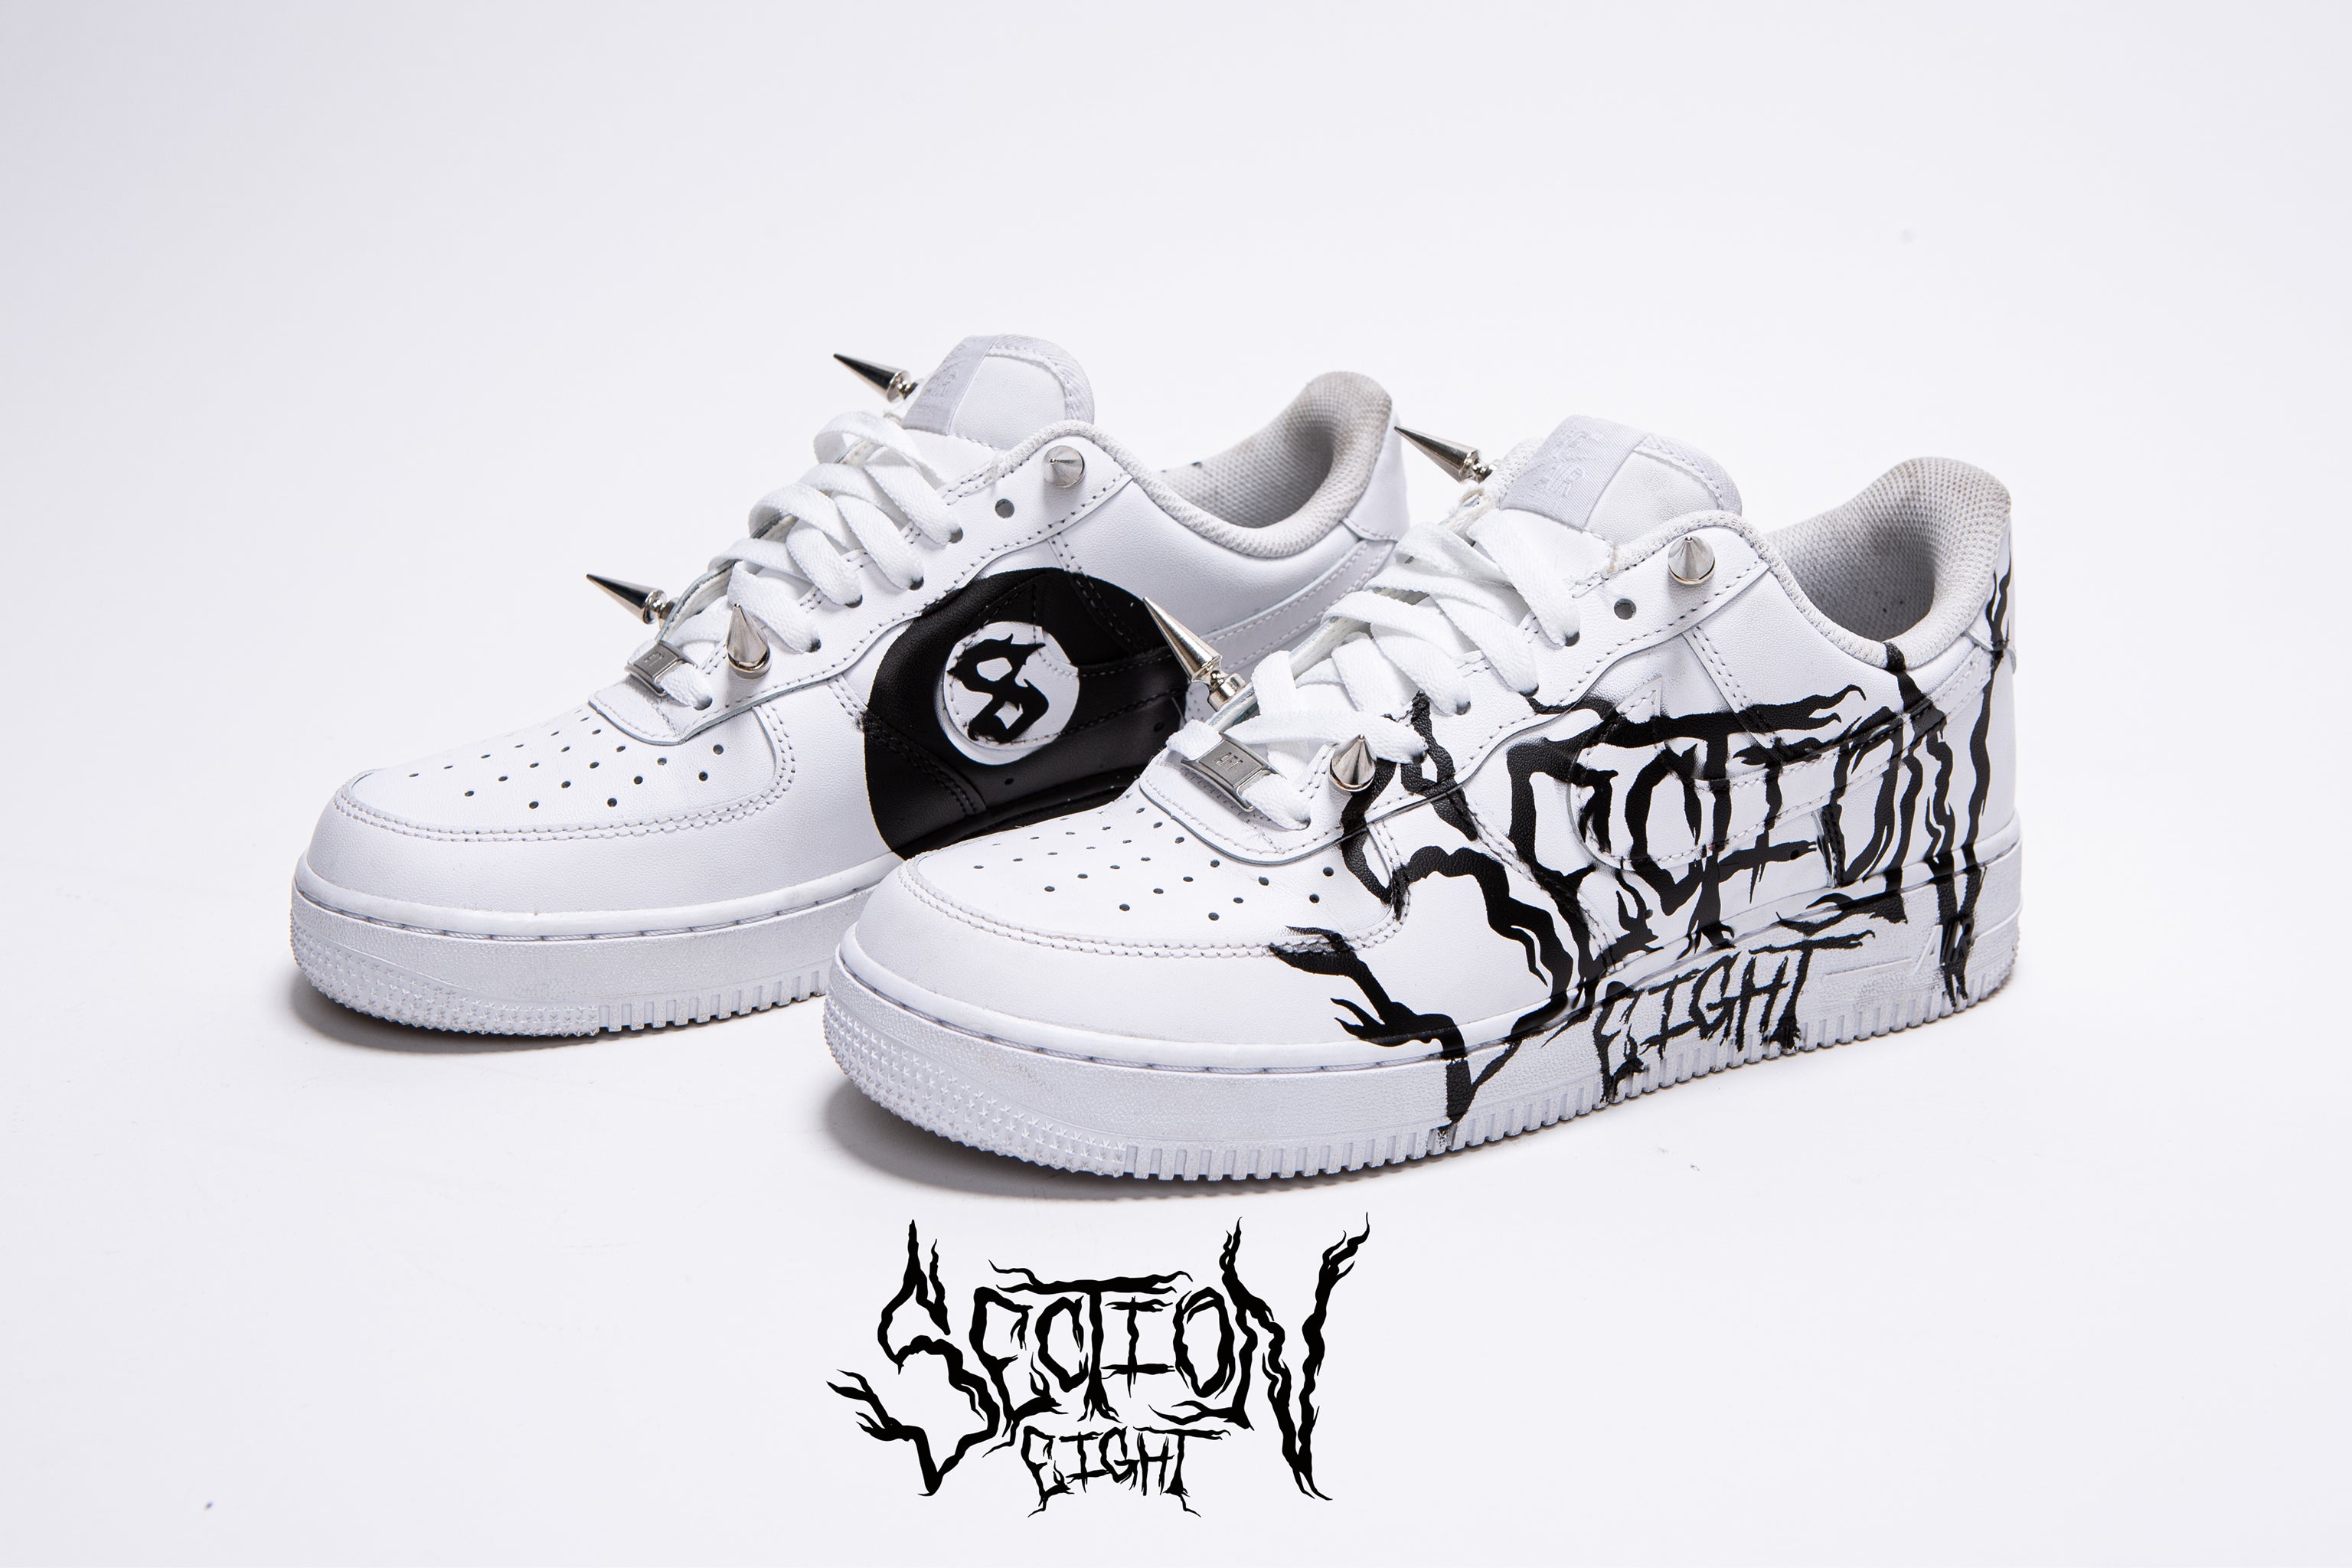 SECTION8 SPIKE AIR FORCE 1